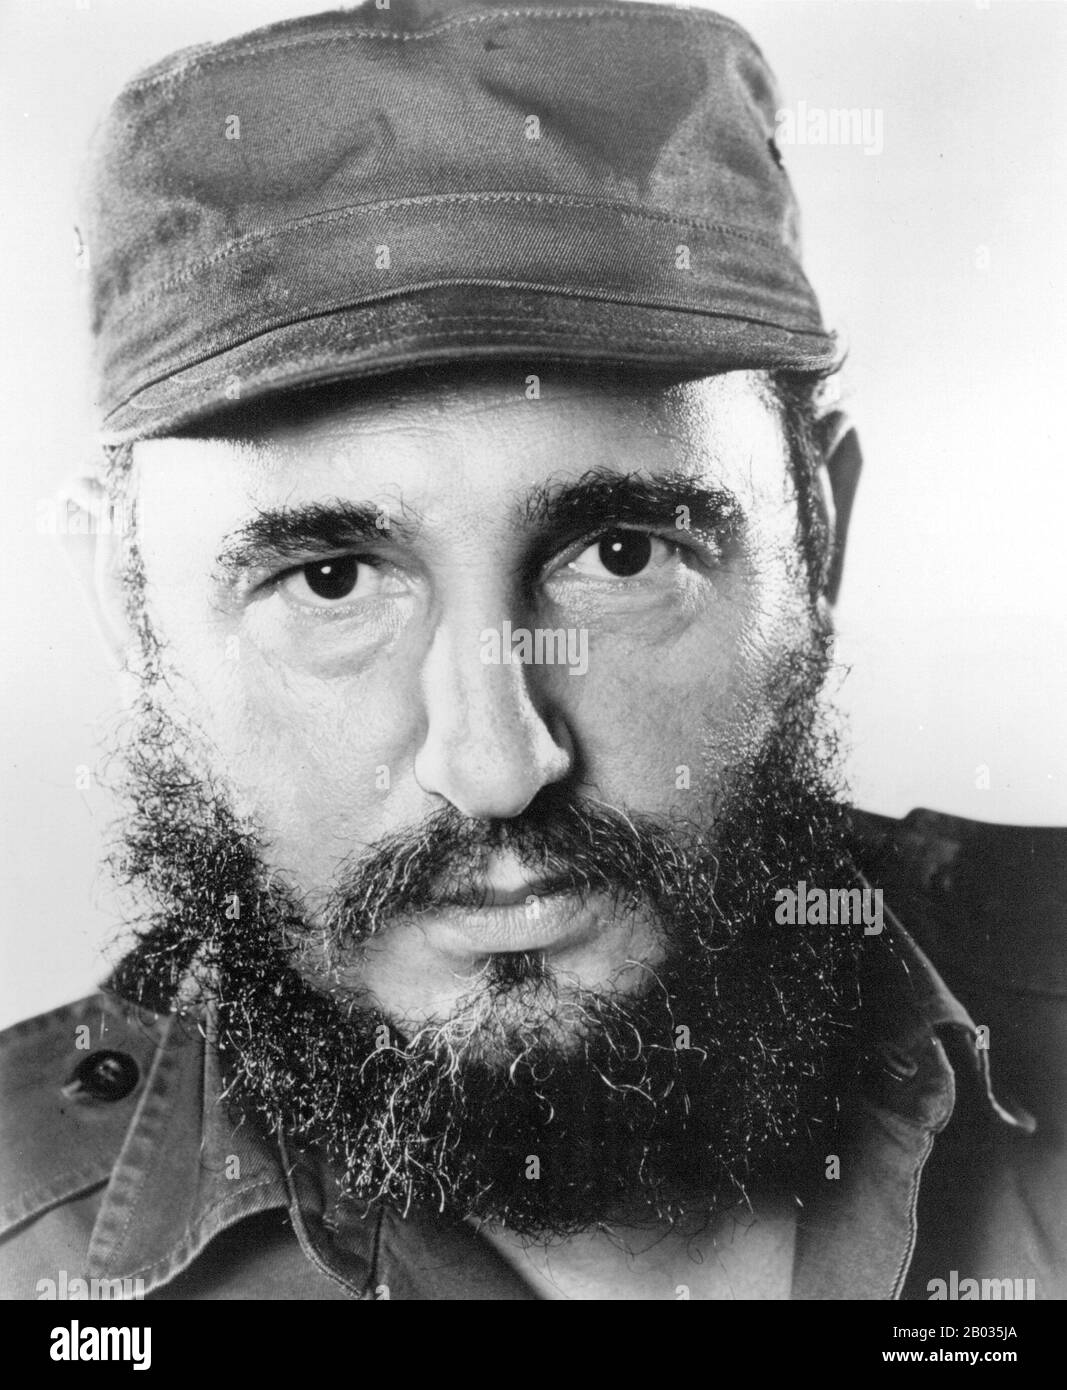 Fidel Alejandro Castro Ruz (born August 13, 1926) is a Cuban political leader and former communist revolutionary.  As the primary leader of the Cuban Revolution, Castro served as the Prime Minister of Cuba from February 1959 to December 1976, and then as the President of the Council of State of Cuba and the President of Council of Ministers of Cuba until his resignation from the office in February 2008. He served as First Secretary of the Communist Party of Cuba from the party's foundation in 1961. Stock Photo